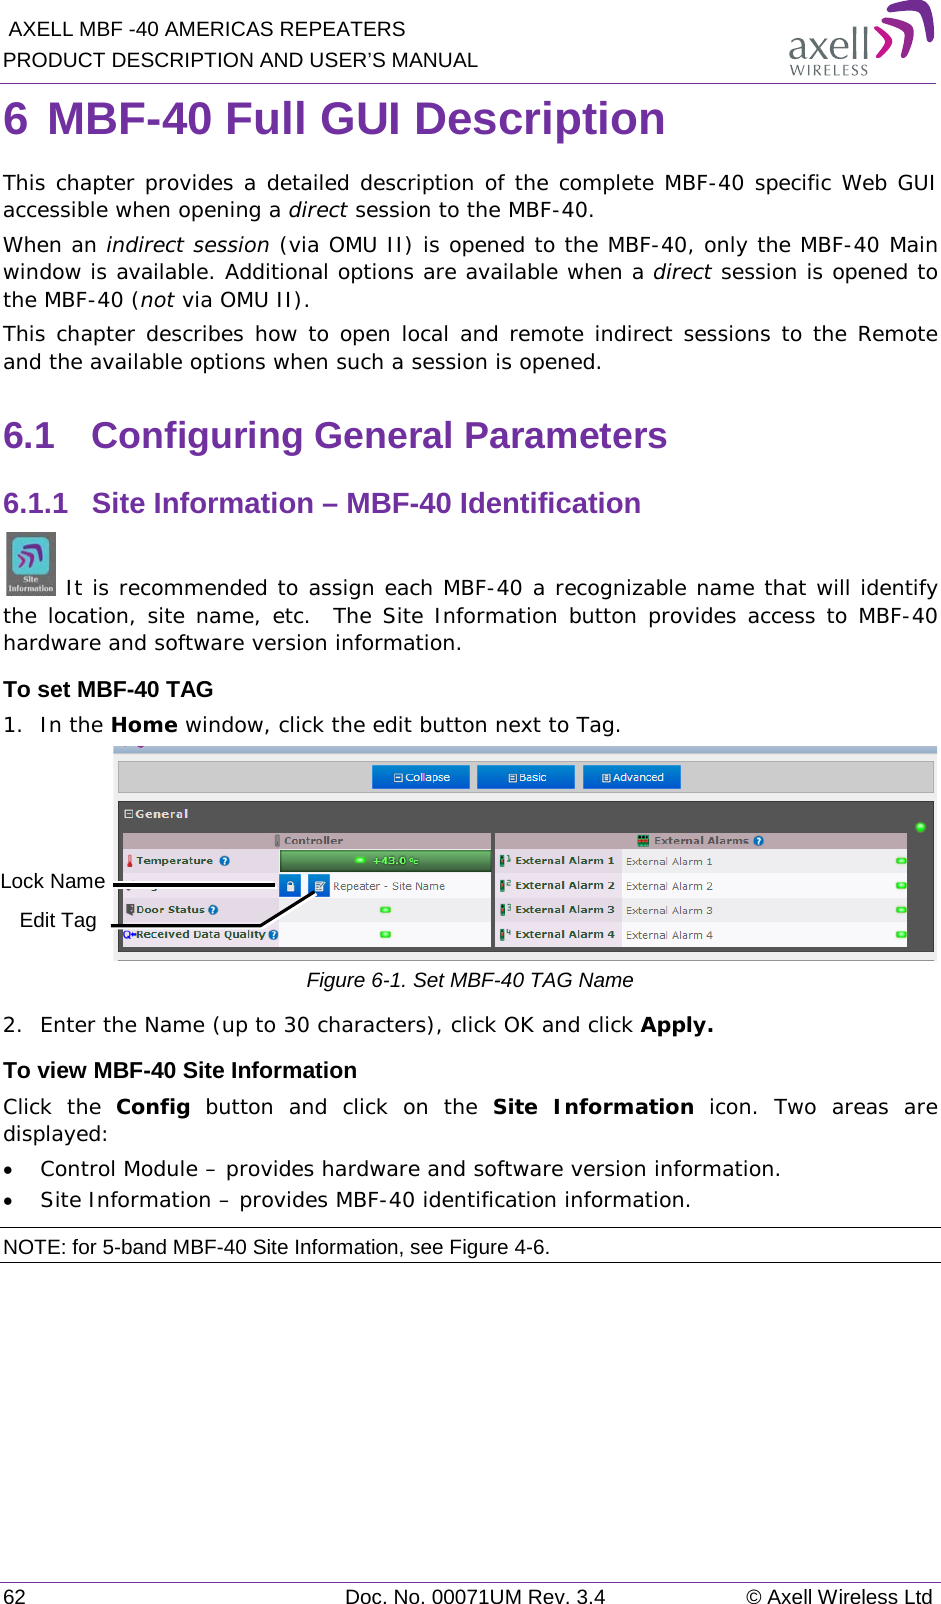  AXELL MBF -40 AMERICAS REPEATERS PRODUCT DESCRIPTION AND USER’S MANUAL 62 Doc. No. 00071UM Rev. 3.4 © Axell Wireless Ltd 6 MBF-40 Full GUI Description  This chapter provides a detailed description of the complete MBF-40 specific Web GUI accessible when opening a direct session to the MBF-40.  When an indirect session (via OMU II) is opened to the MBF-40, only the MBF-40 Main window is available. Additional options are available when a direct session is opened to the MBF-40 (not via OMU II).  This chapter describes how to open local and remote indirect sessions to the Remote and the available options when such a session is opened. 6.1  Configuring General Parameters 6.1.1  Site Information – MBF-40 Identification  It is recommended to assign each MBF-40 a recognizable name that will identify the location, site name, etc.  The Site Information button provides access to MBF-40 hardware and software version information. To set MBF-40 TAG 1.  In the Home window, click the edit button next to Tag.  Figure  6-1. Set MBF-40 TAG Name 2.  Enter the Name (up to 30 characters), click OK and click Apply. To view MBF-40 Site Information Click the Config button and click on the Site Information  icon. Two areas are displayed: • Control Module – provides hardware and software version information. • Site Information – provides MBF-40 identification information.  NOTE: for 5-band MBF-40 Site Information, see Figure  4-6.  Edit Tag Lock Name 